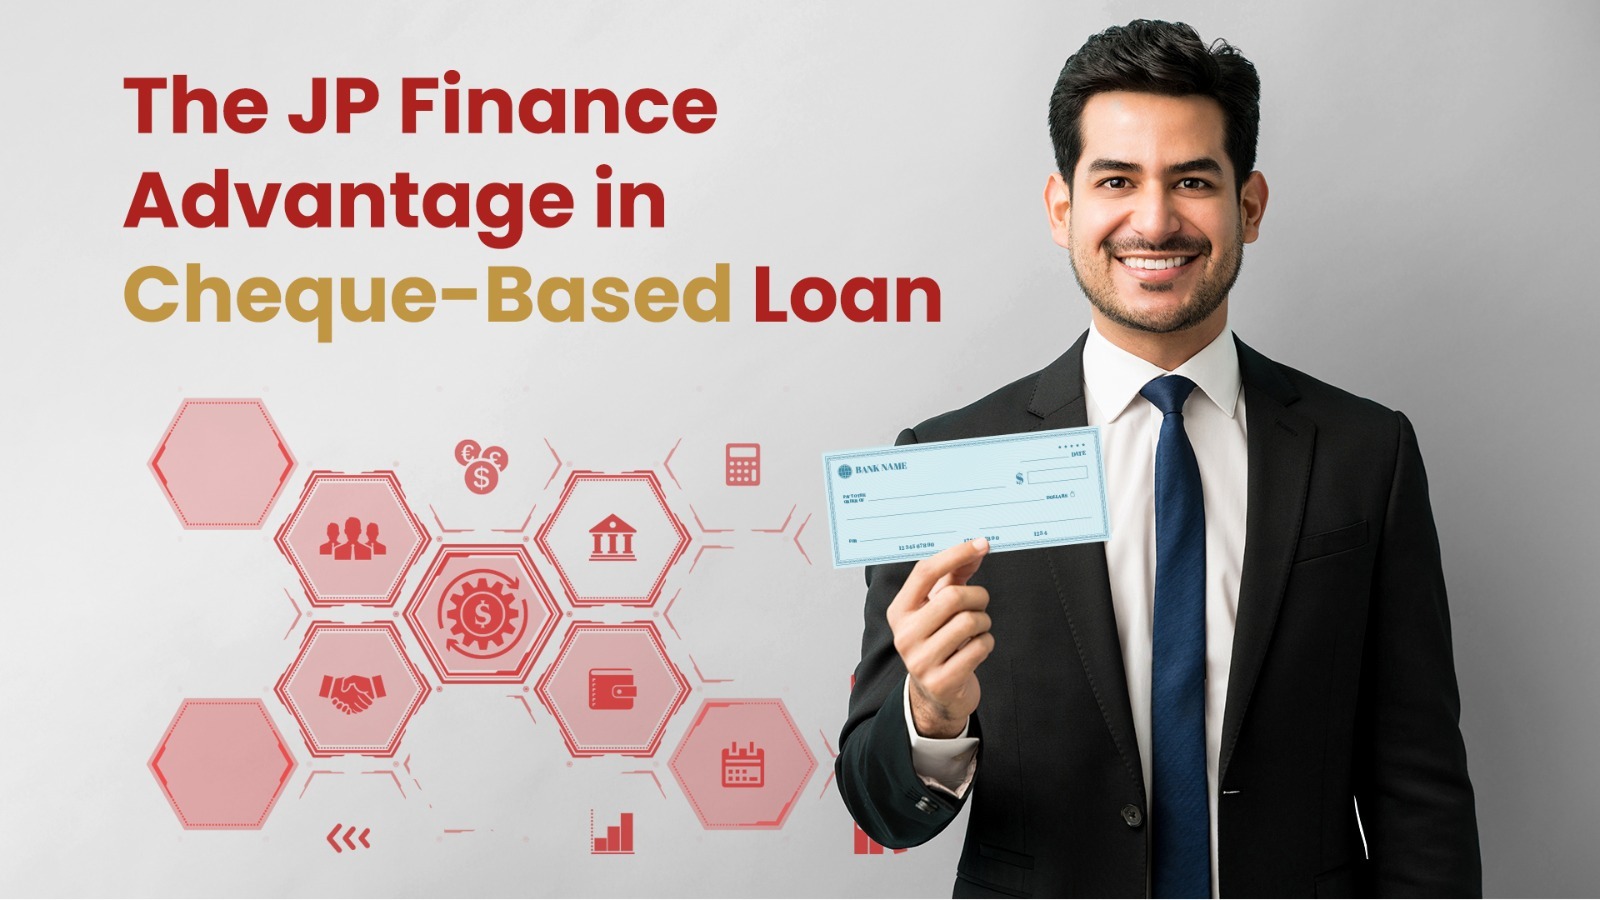 The JP Finance Advantage in Cheque-Based Loan